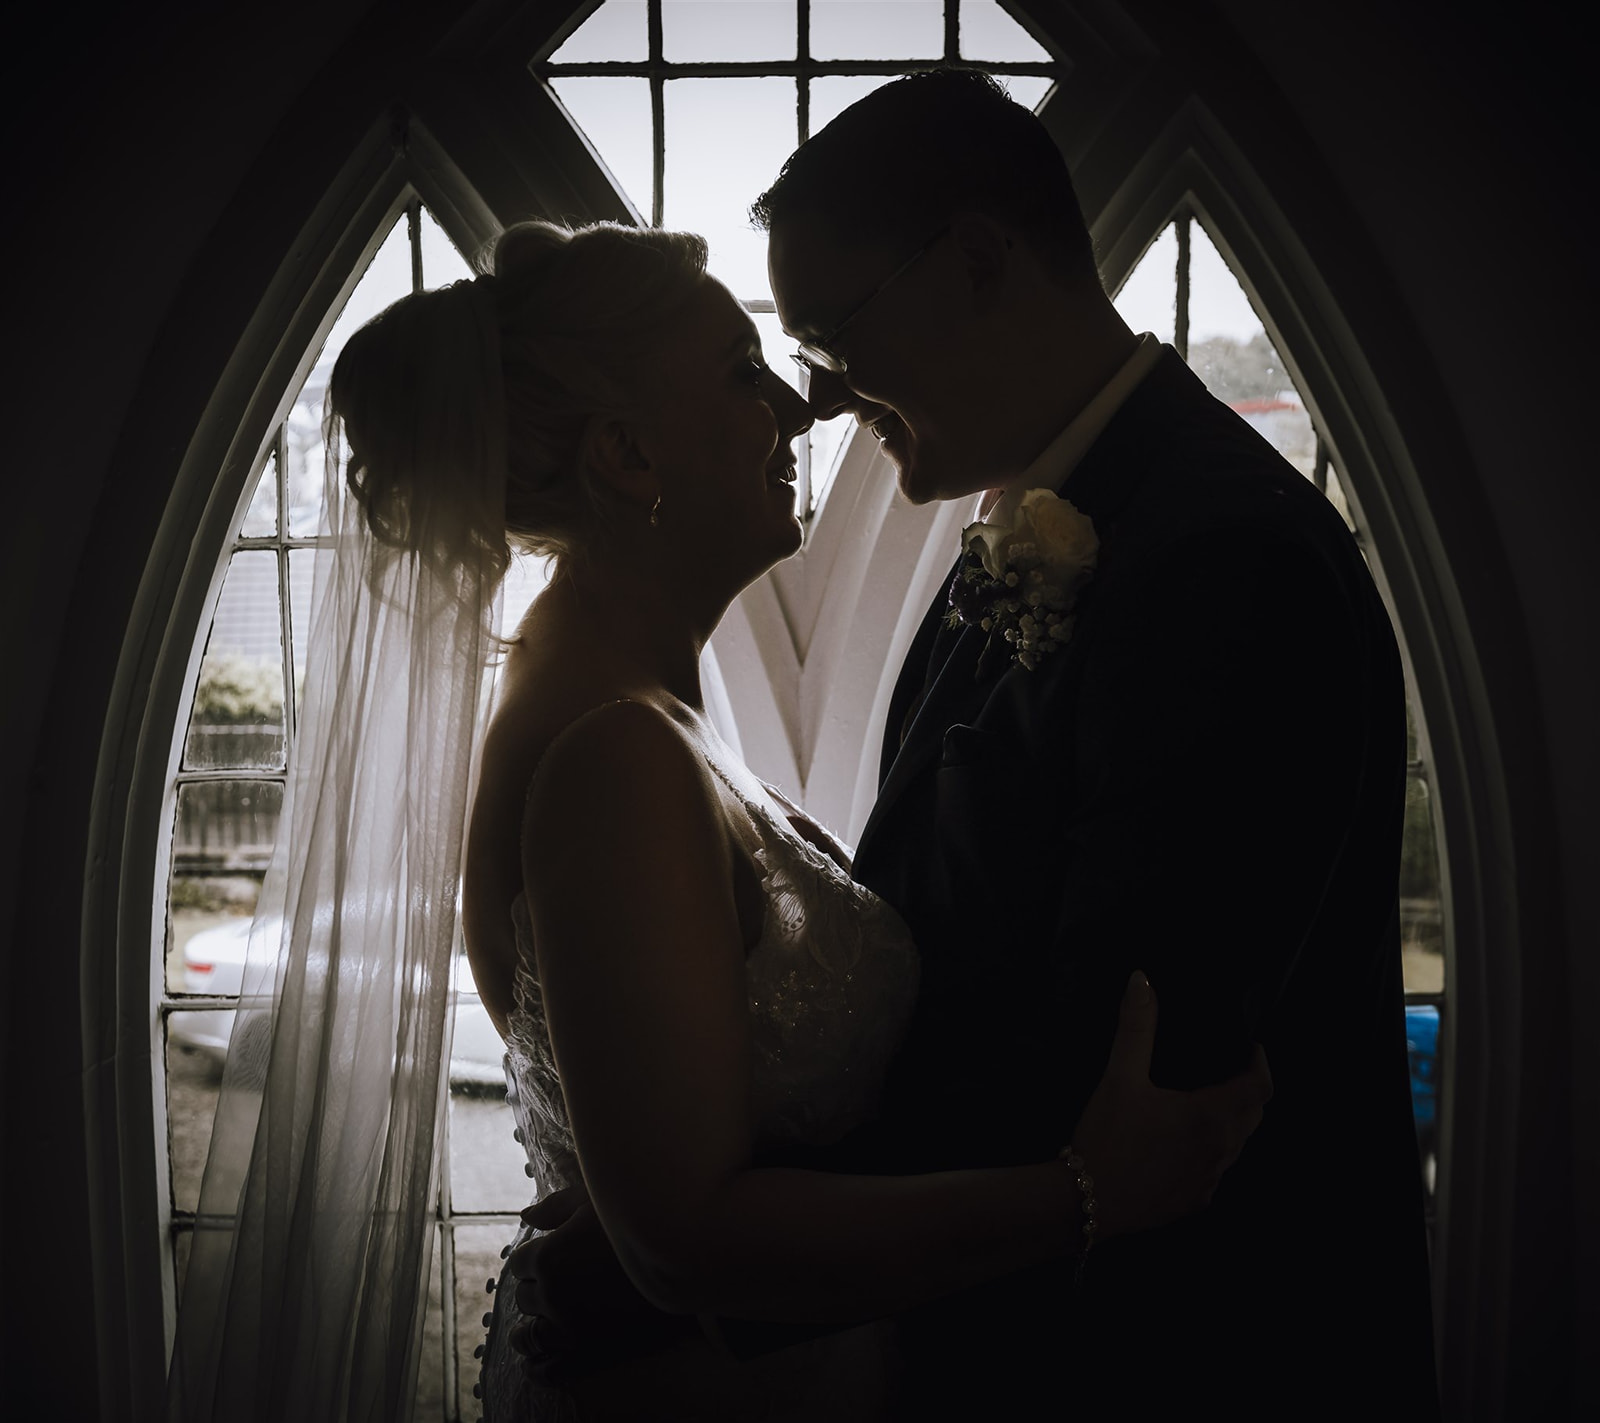 Silouette of the bride and groom embracing at a window in the church in Ballina